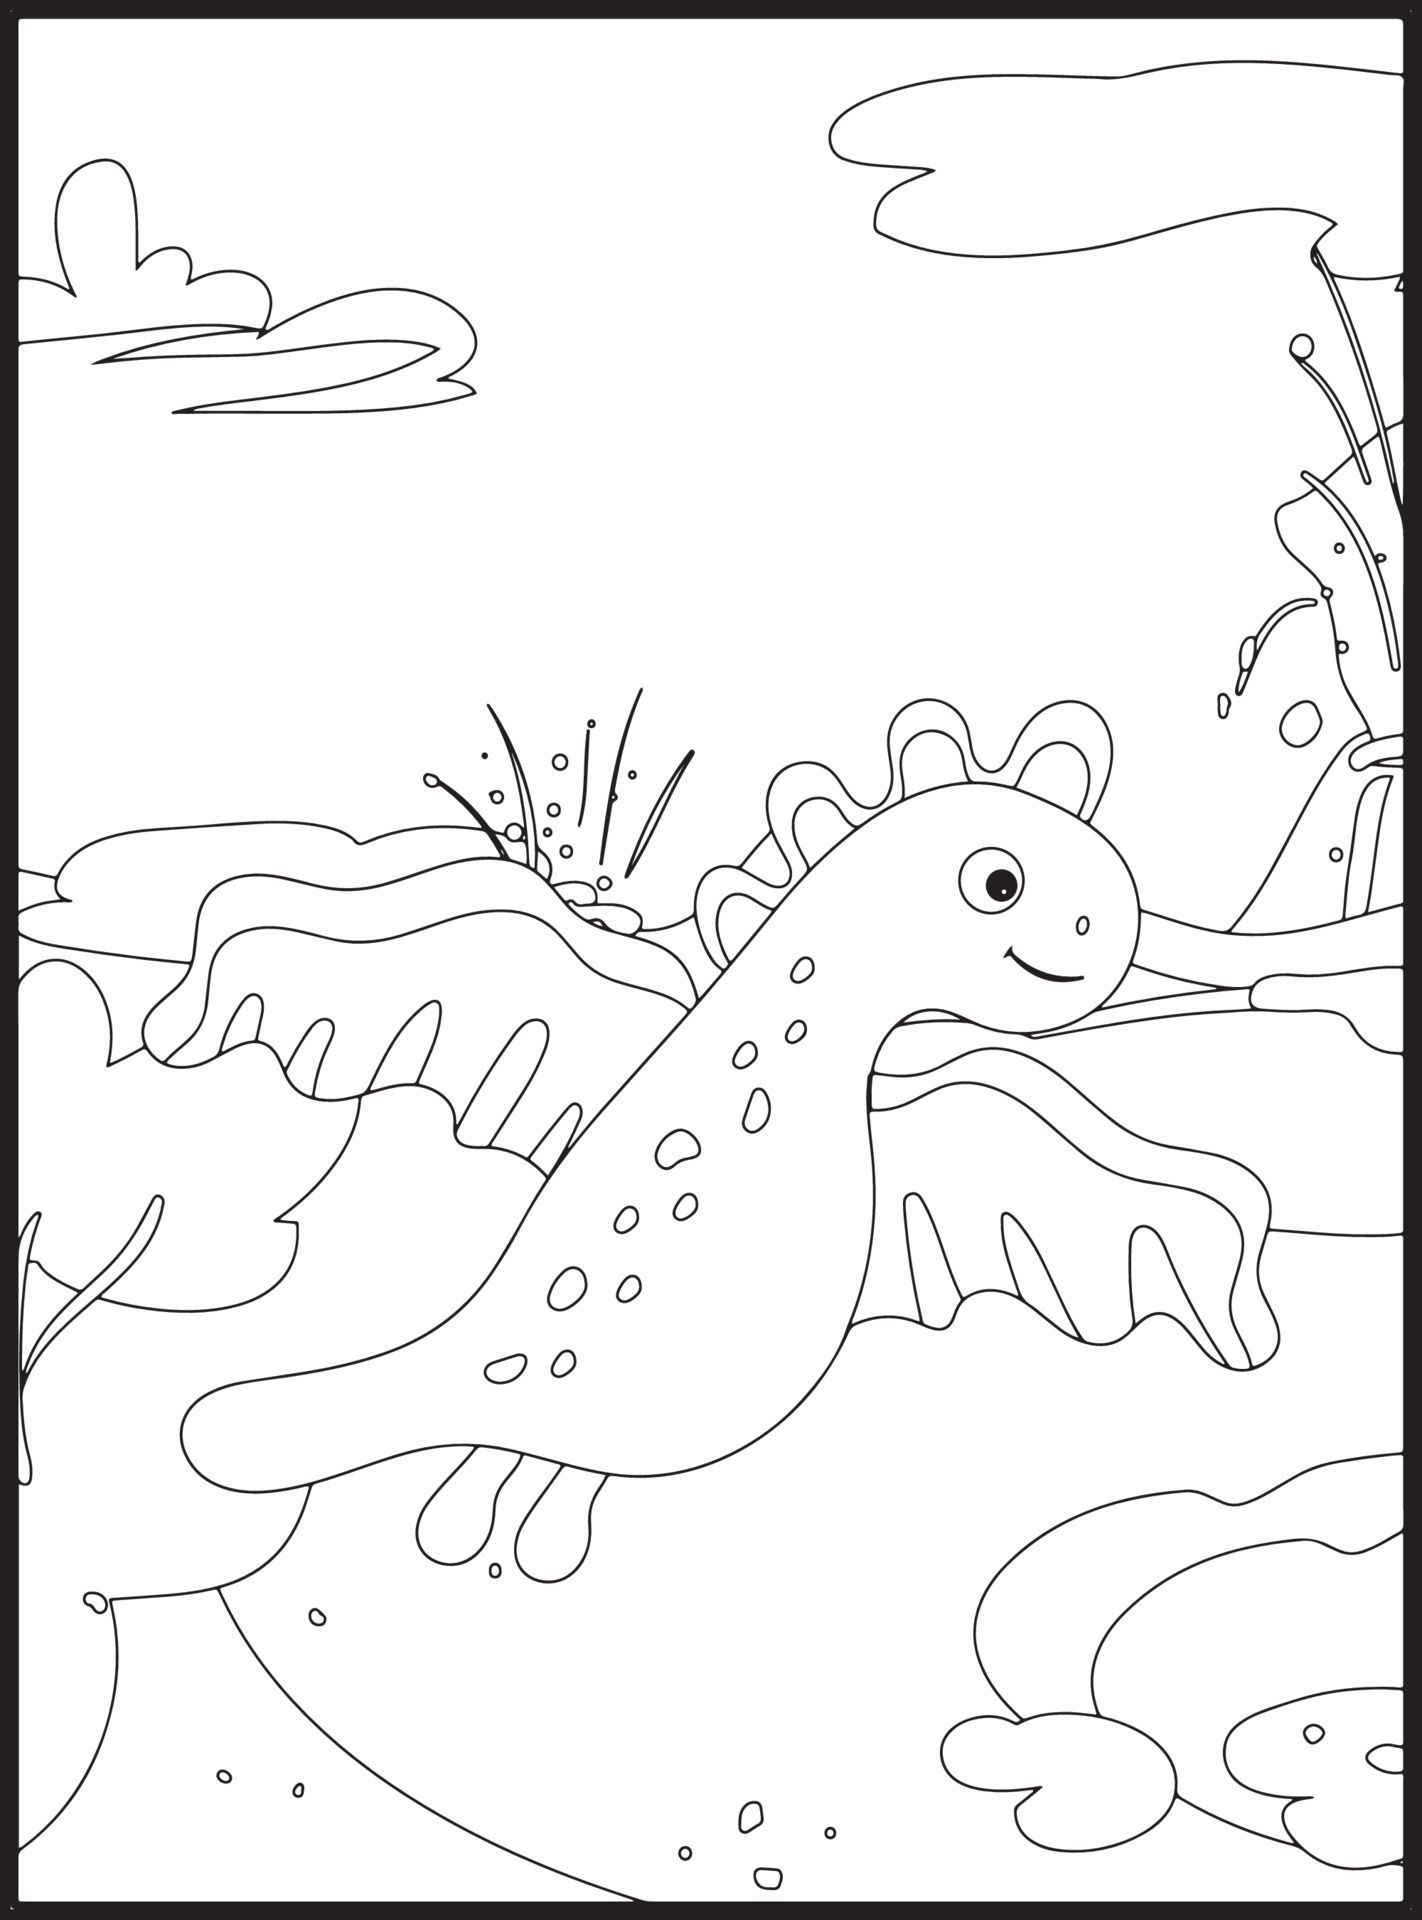 190 Cute Dinosaur Coloring Pages: Roaring Fun for Kids 196